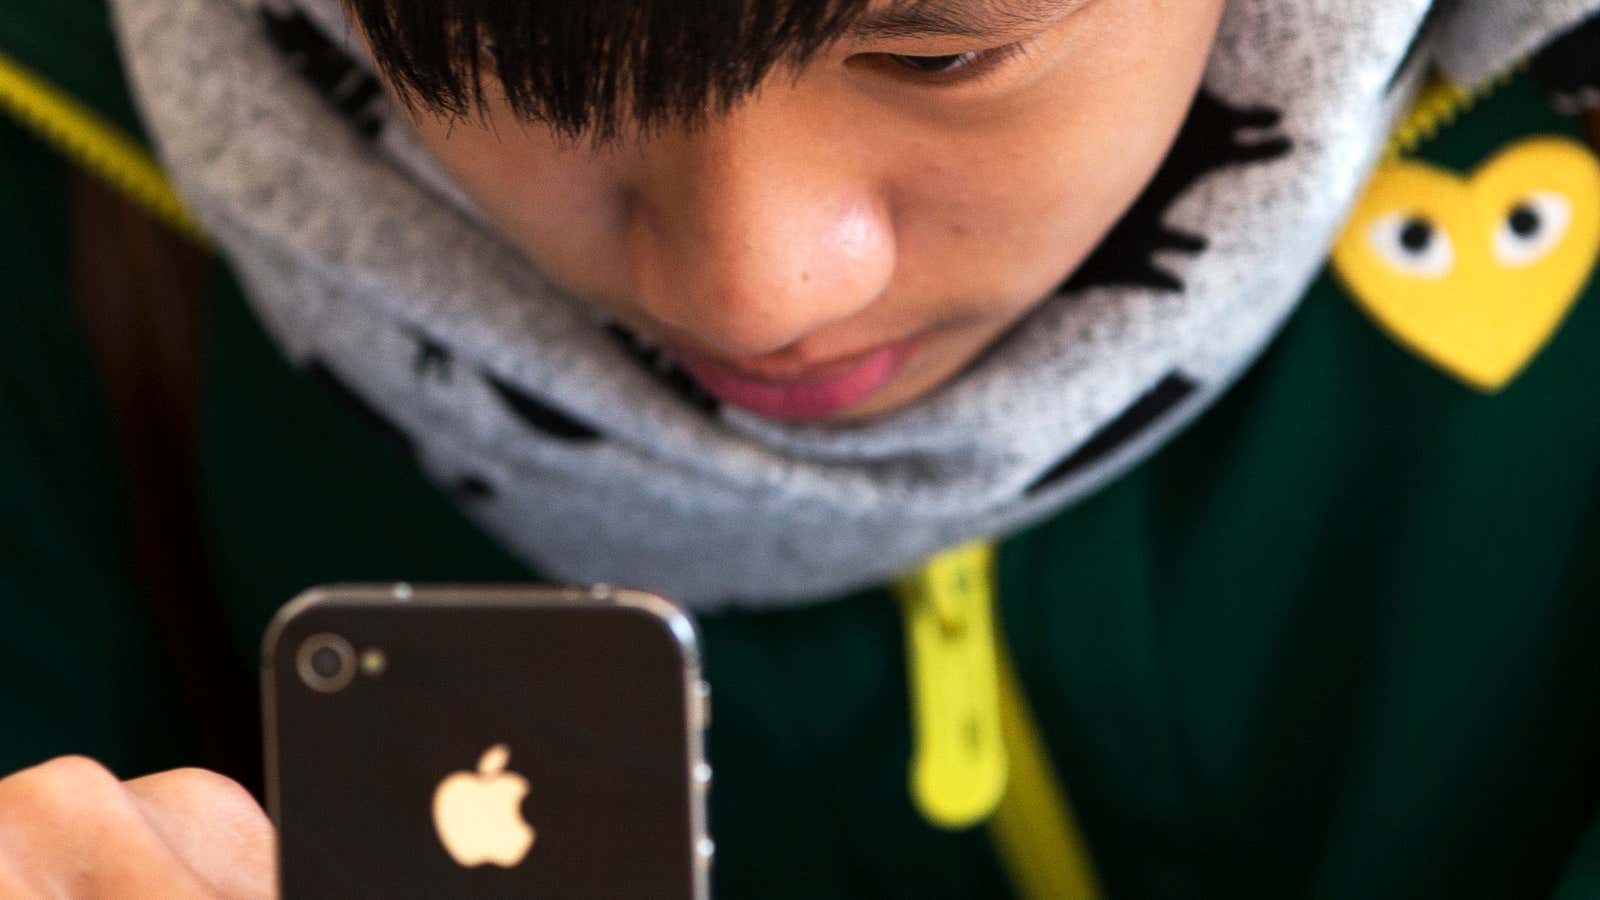 Apple’s new China strategy: Get ’em young.